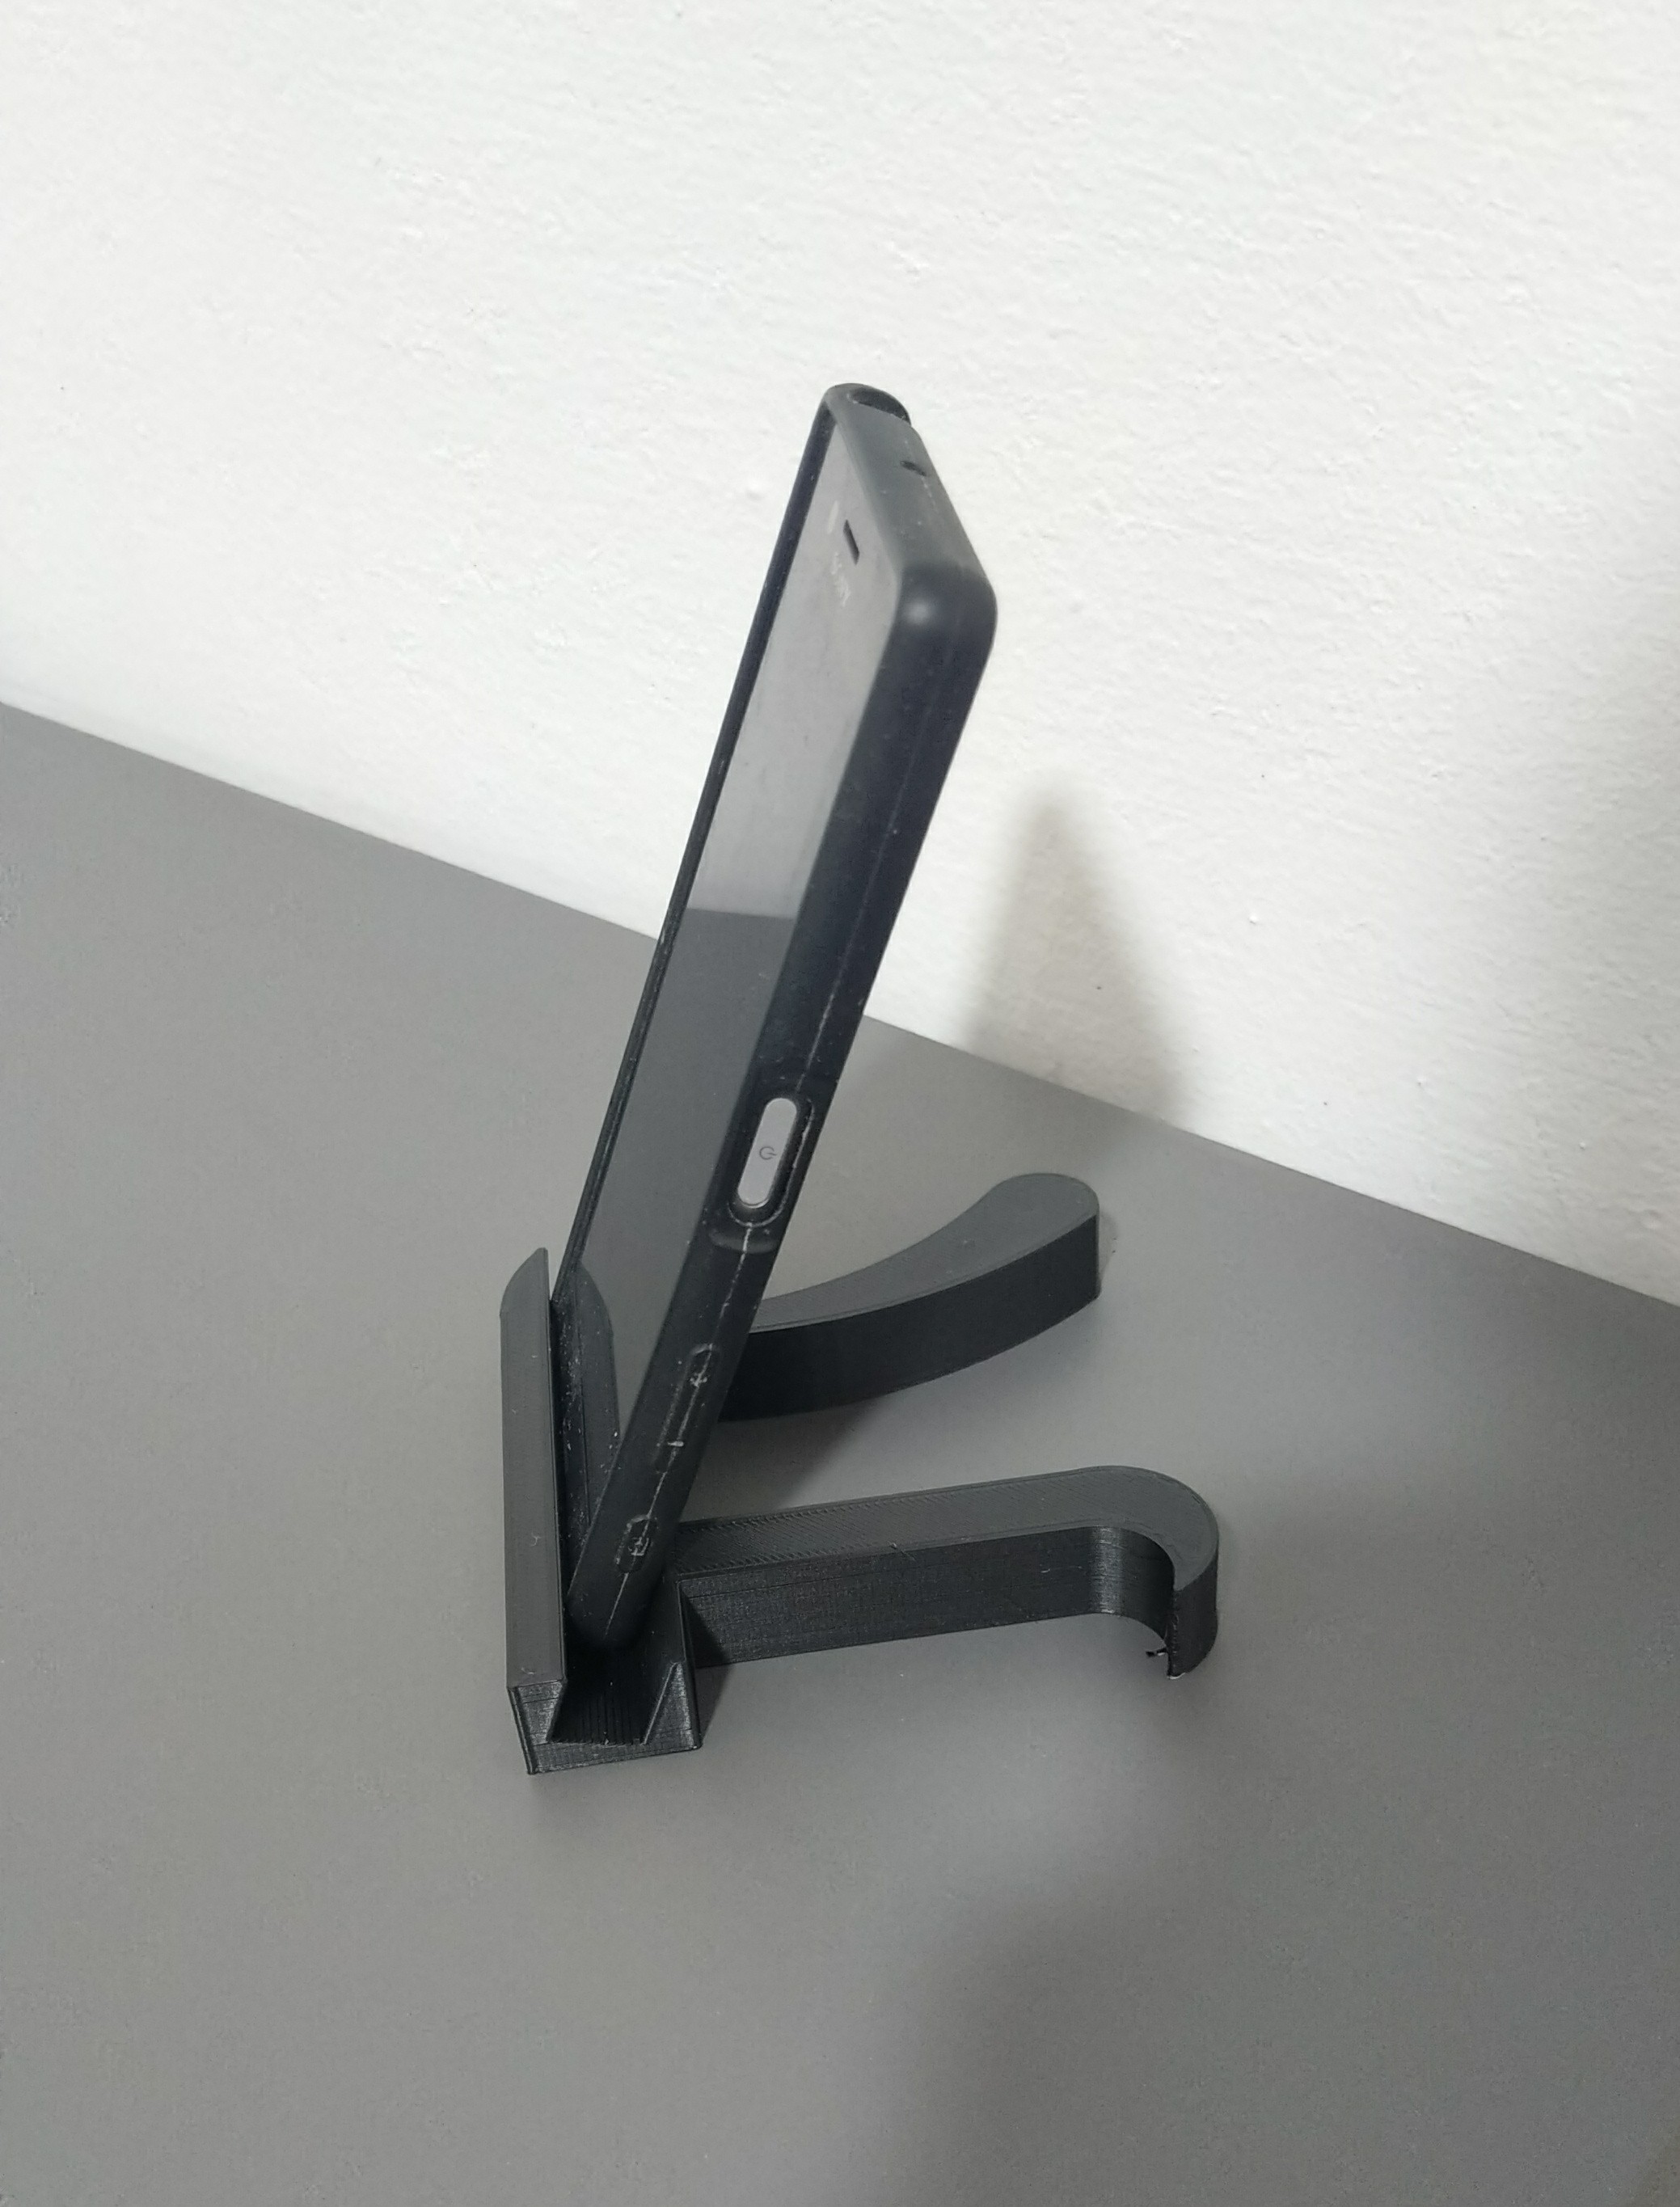 Pie phone stand with a twist